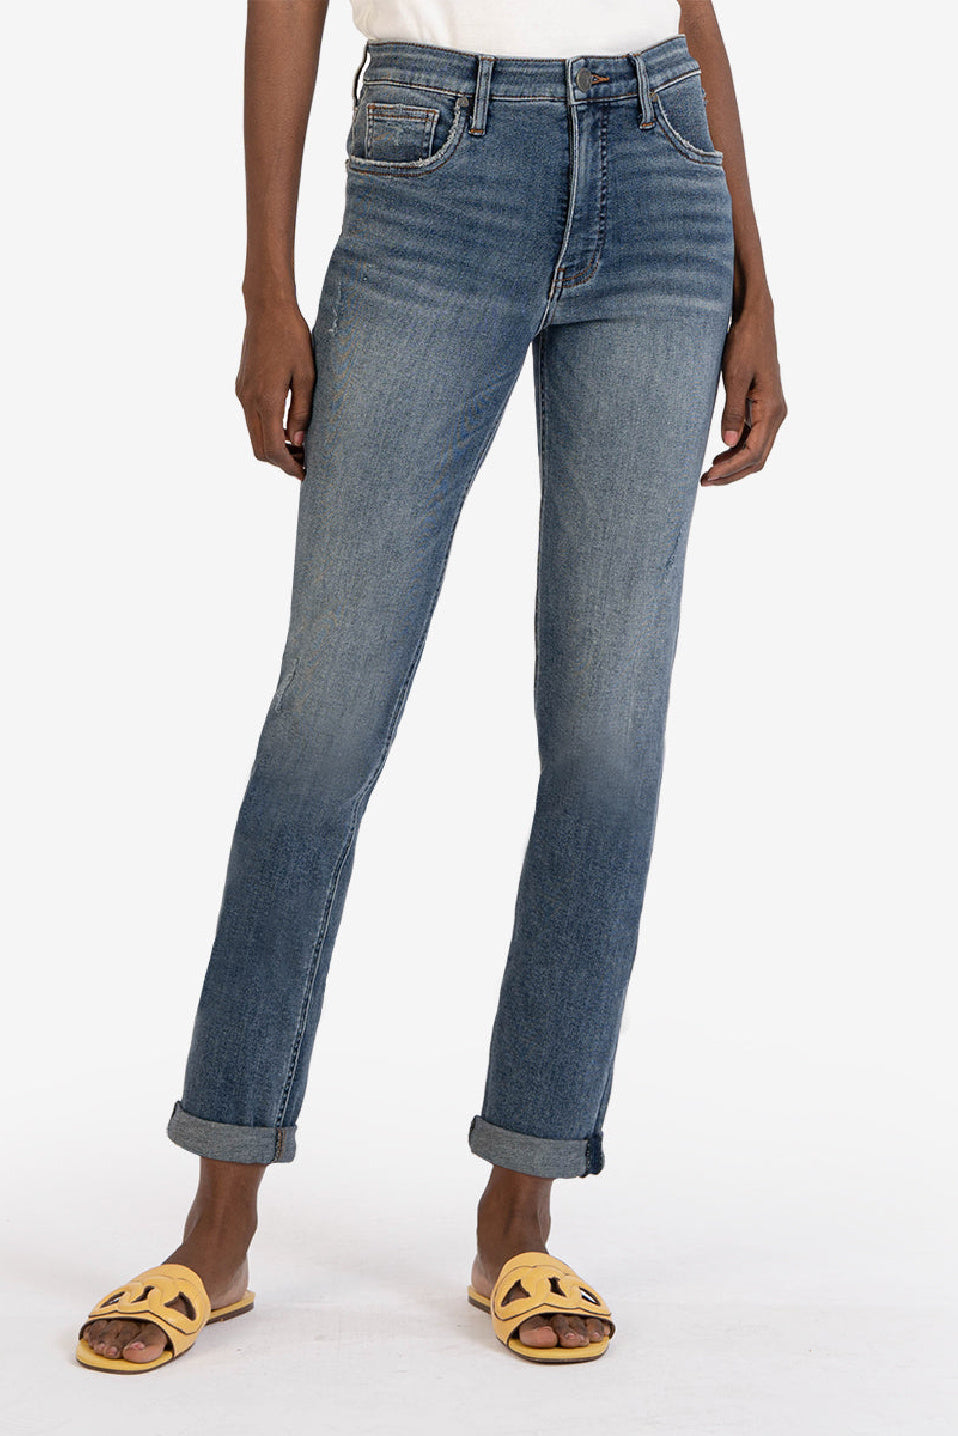 Kut From The Kloth Rachel High Rise Mom Jeans (Cleanse Wash)